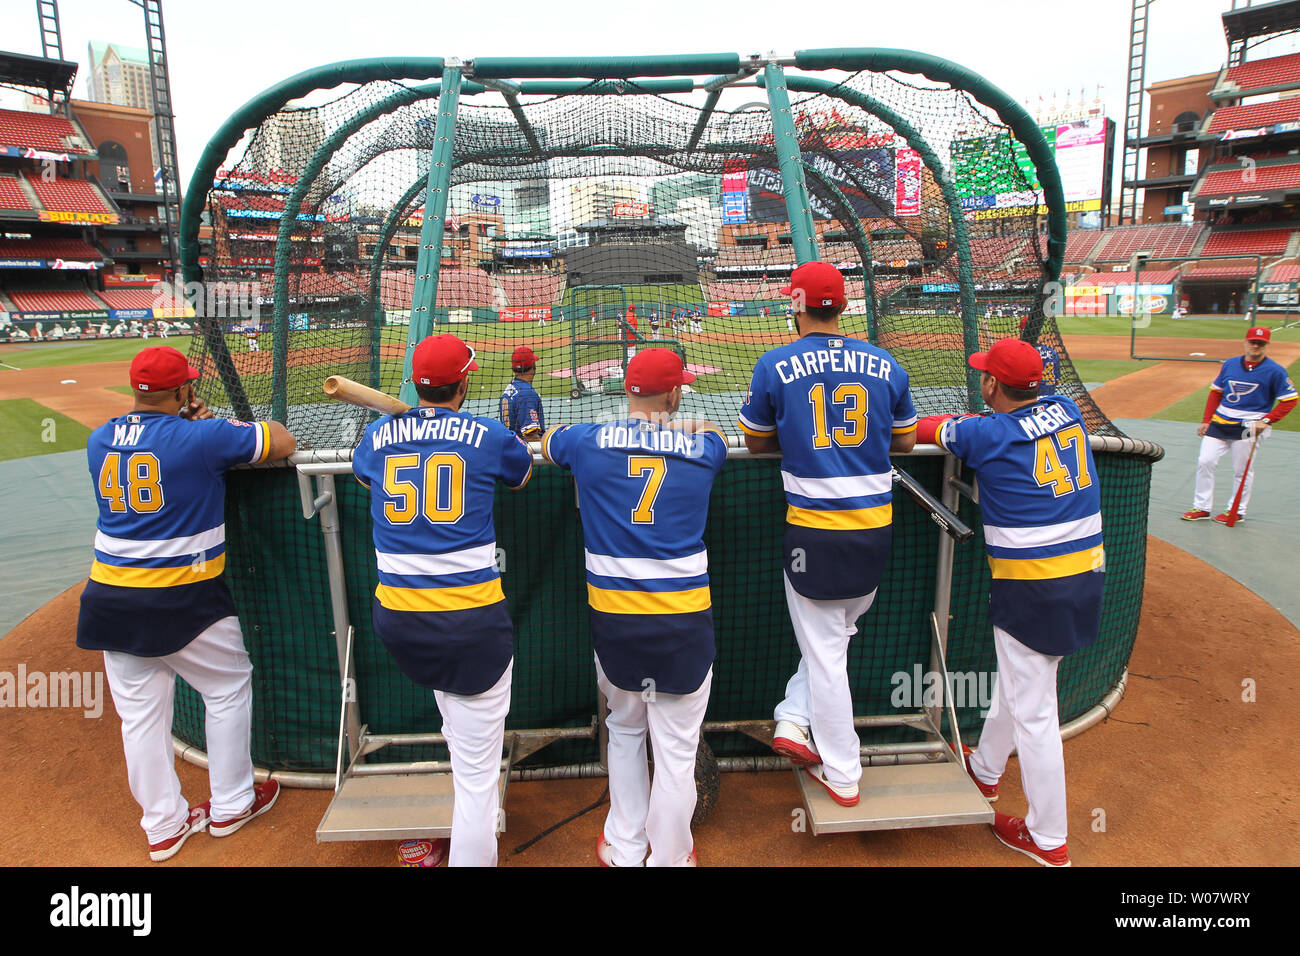 St. Louis Cardinals players and coaches watch batting practice wearing St.  Louis Blues sweaters before a game against the Cincinnati Reds at Busch  Stadium in St. Louis on September 28, 2016. The